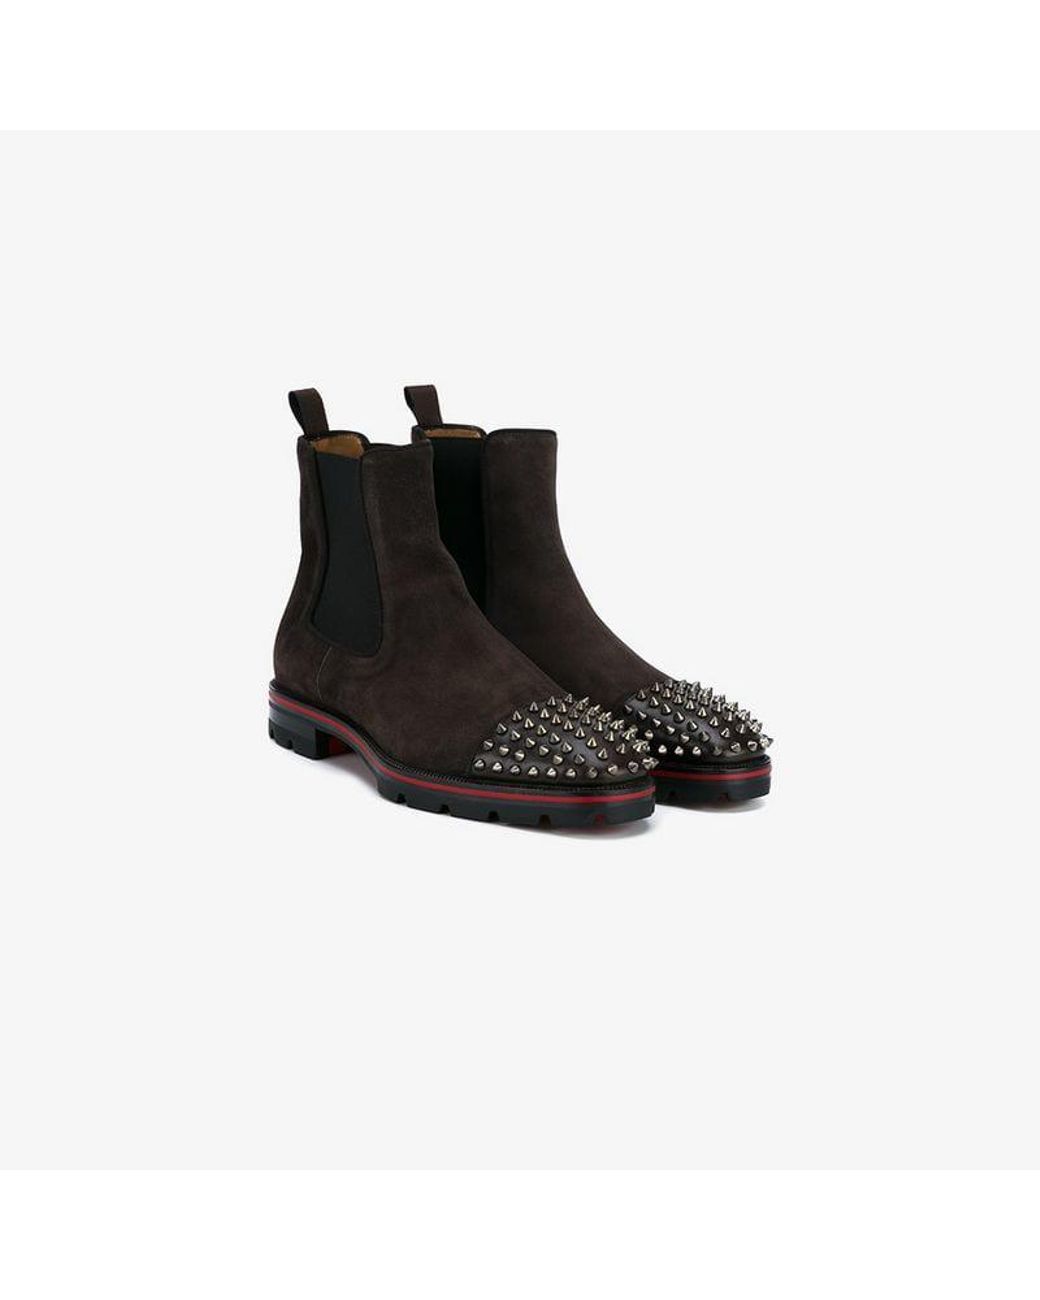 CHRISTIAN LOUBOUTIN Spiked Suede Chelsea Boots for Men